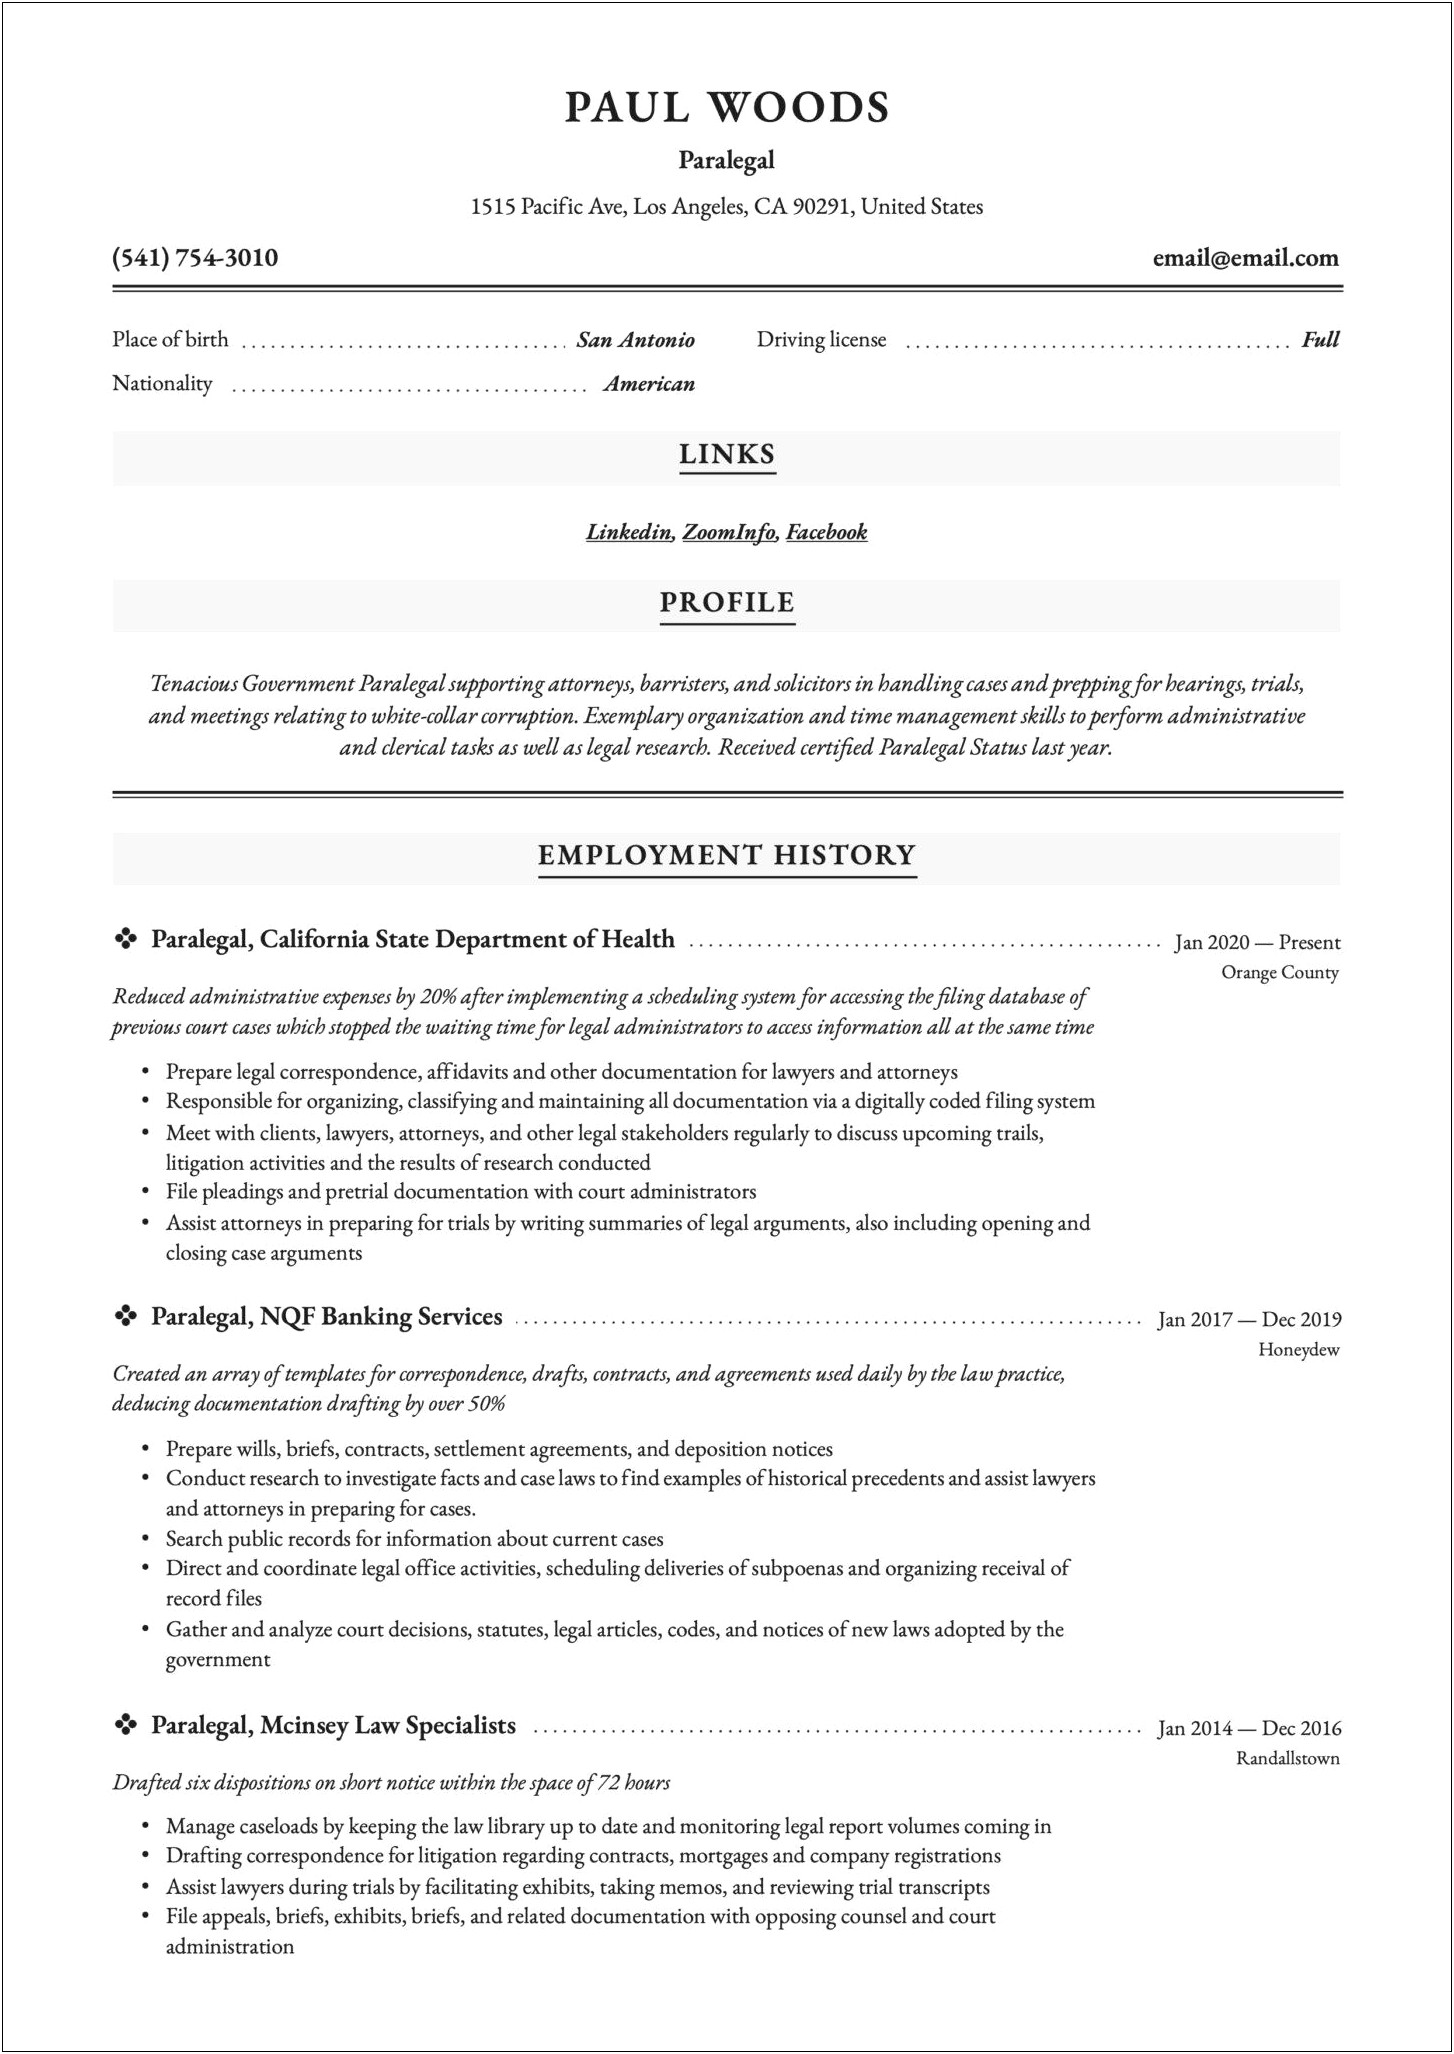 Examples Of Resumes For Legal Assistants